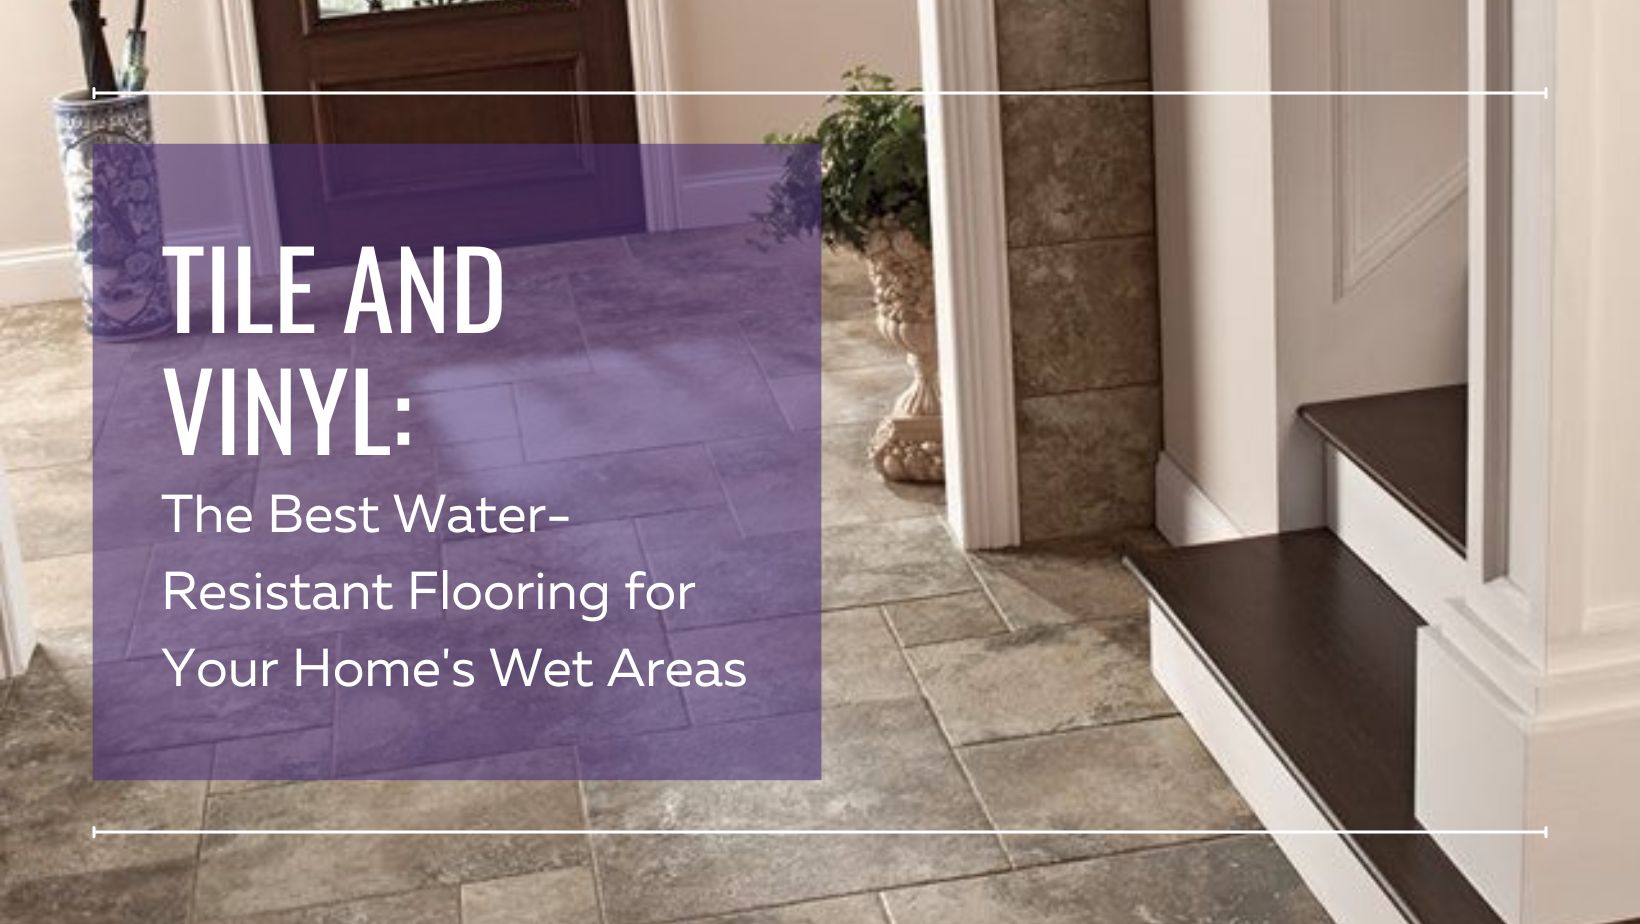 Tile and Vinyl: The Best Water-Resistant Flooring for Your Home's Wet Areas